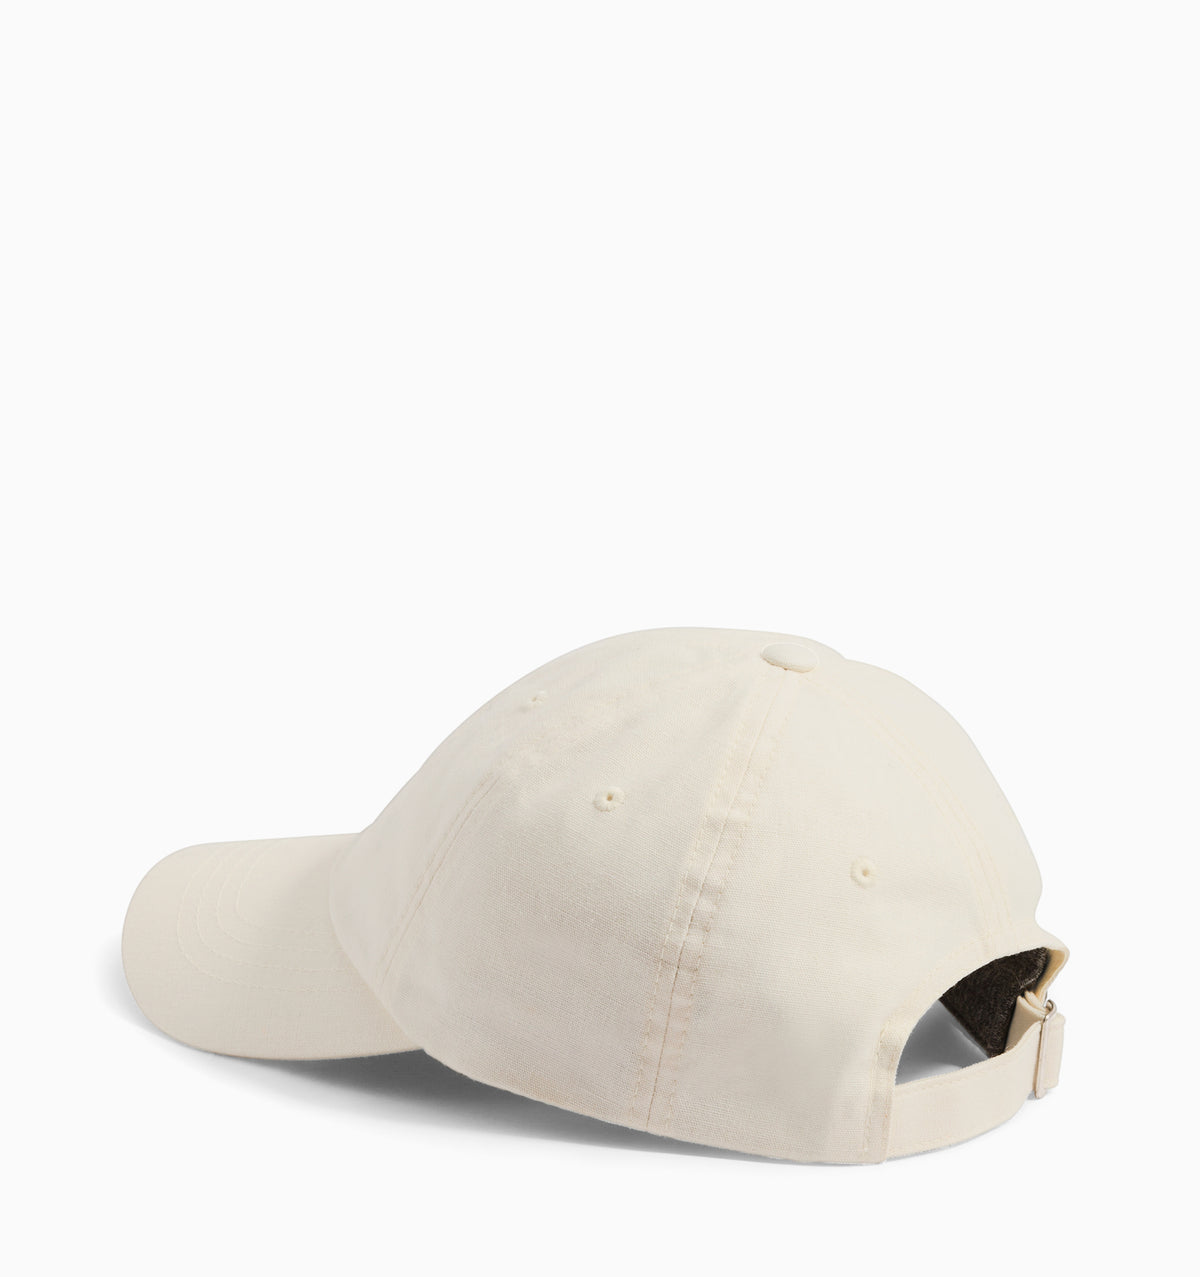 The North Face Norm Hat - White